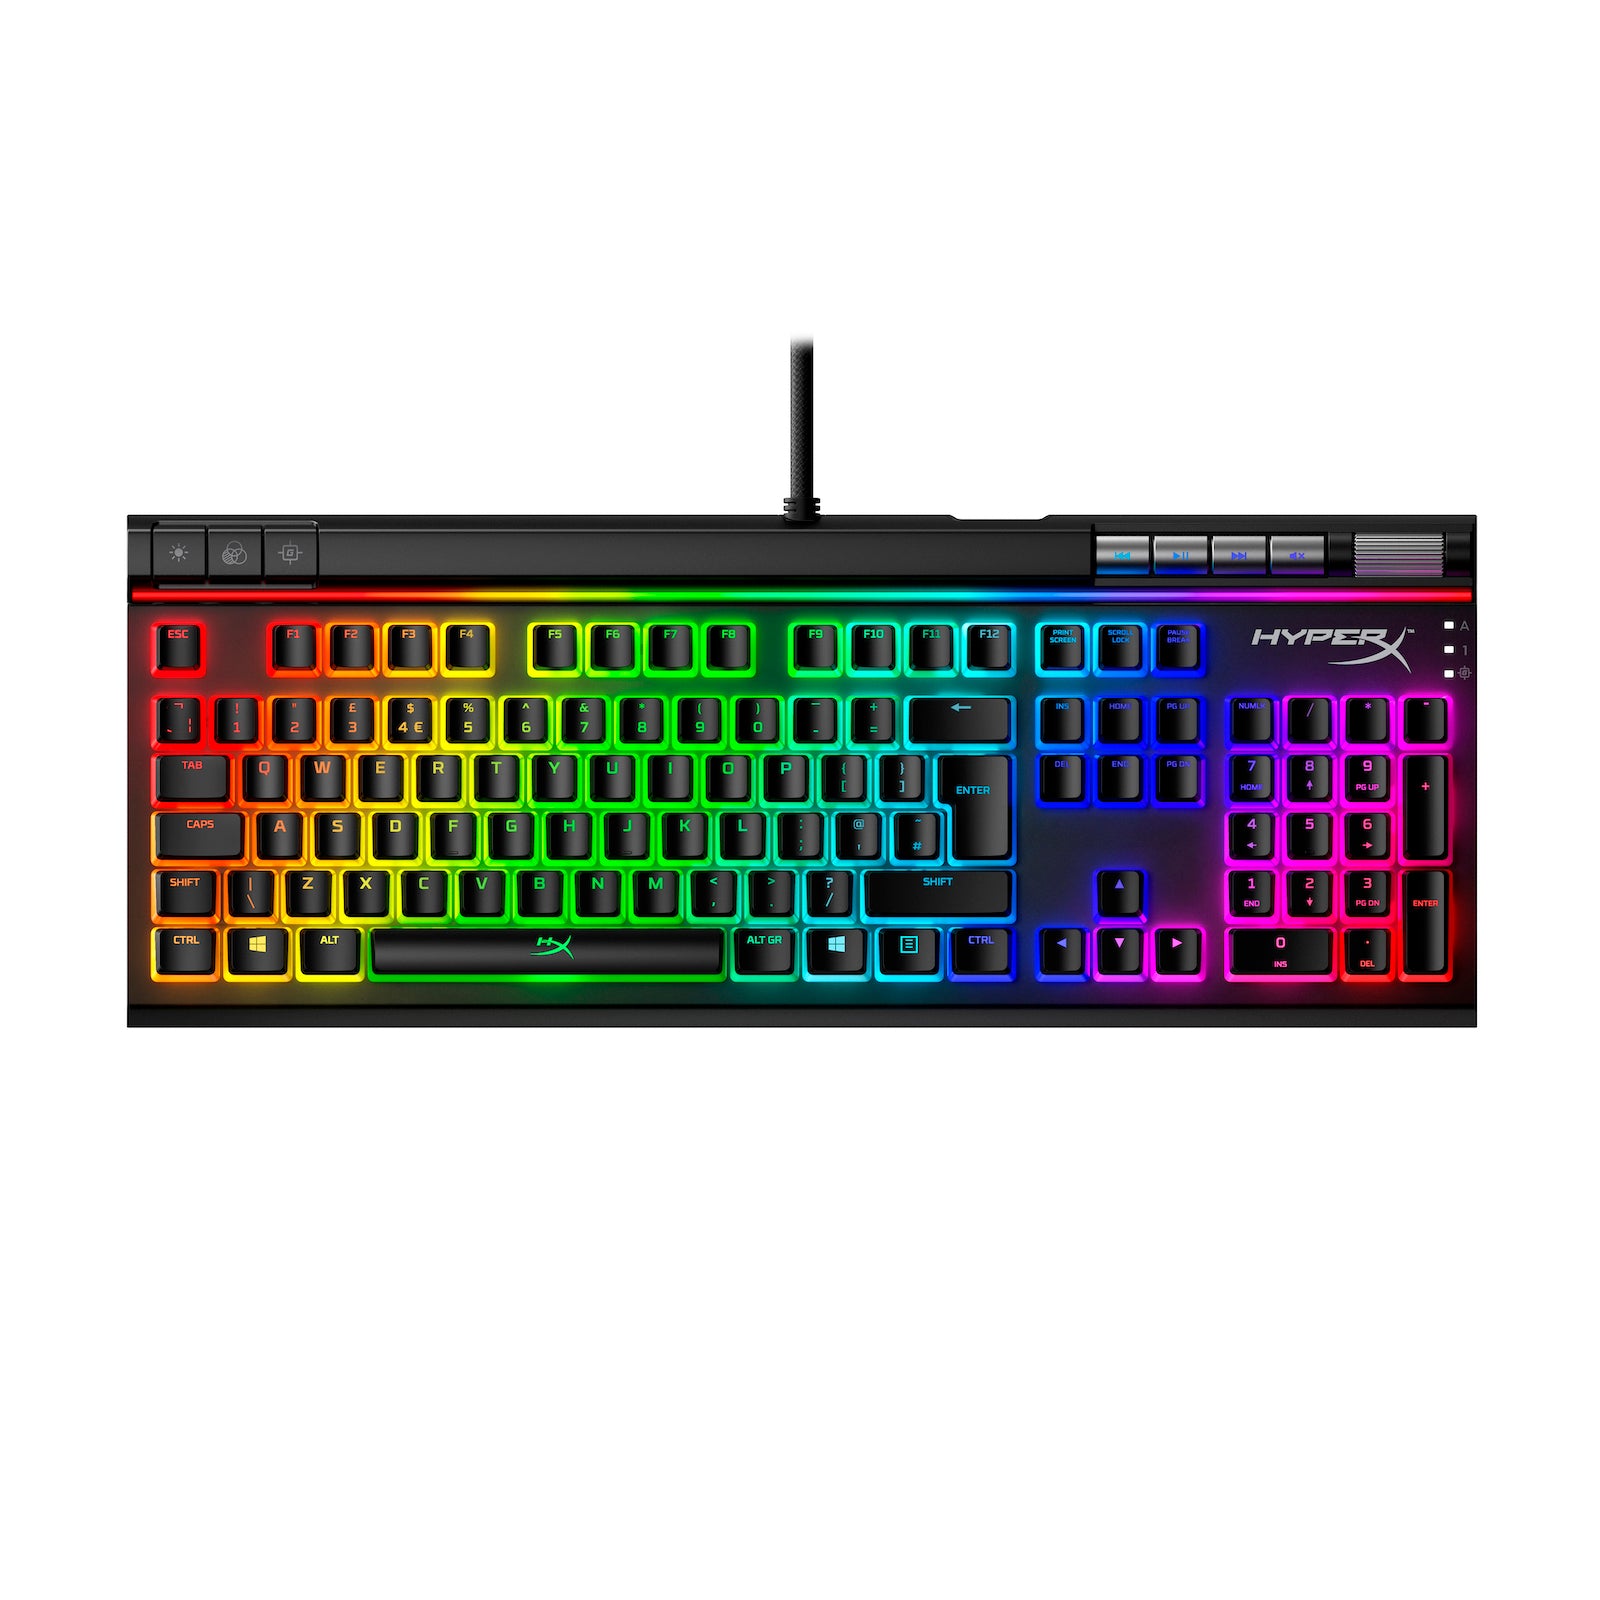 HyperX Pudding Keycaps ABS top down view on keyboard with RGB lighting